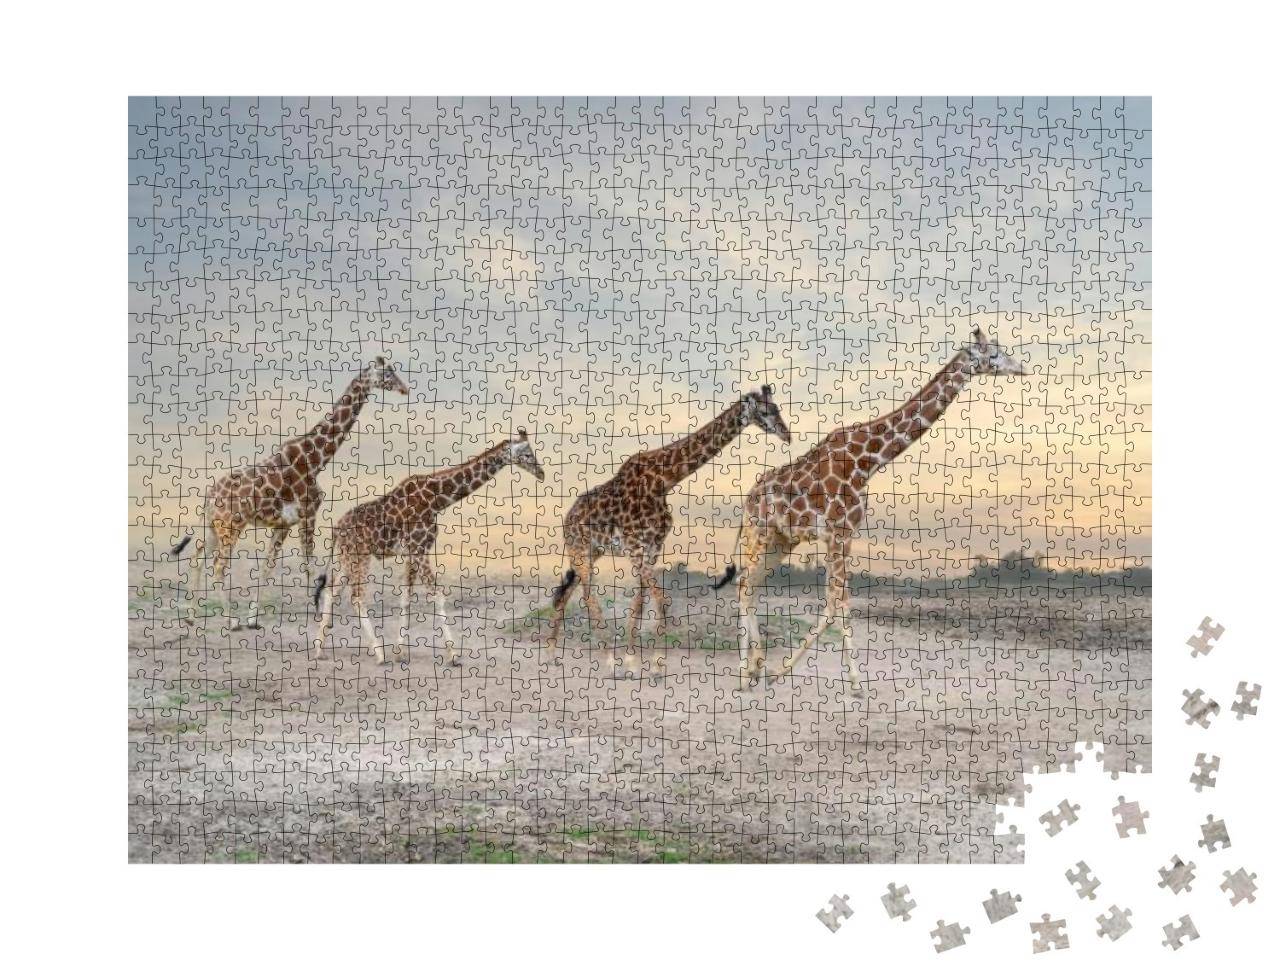 Herd of Giraffes, Giraffe Family... Jigsaw Puzzle with 1000 pieces